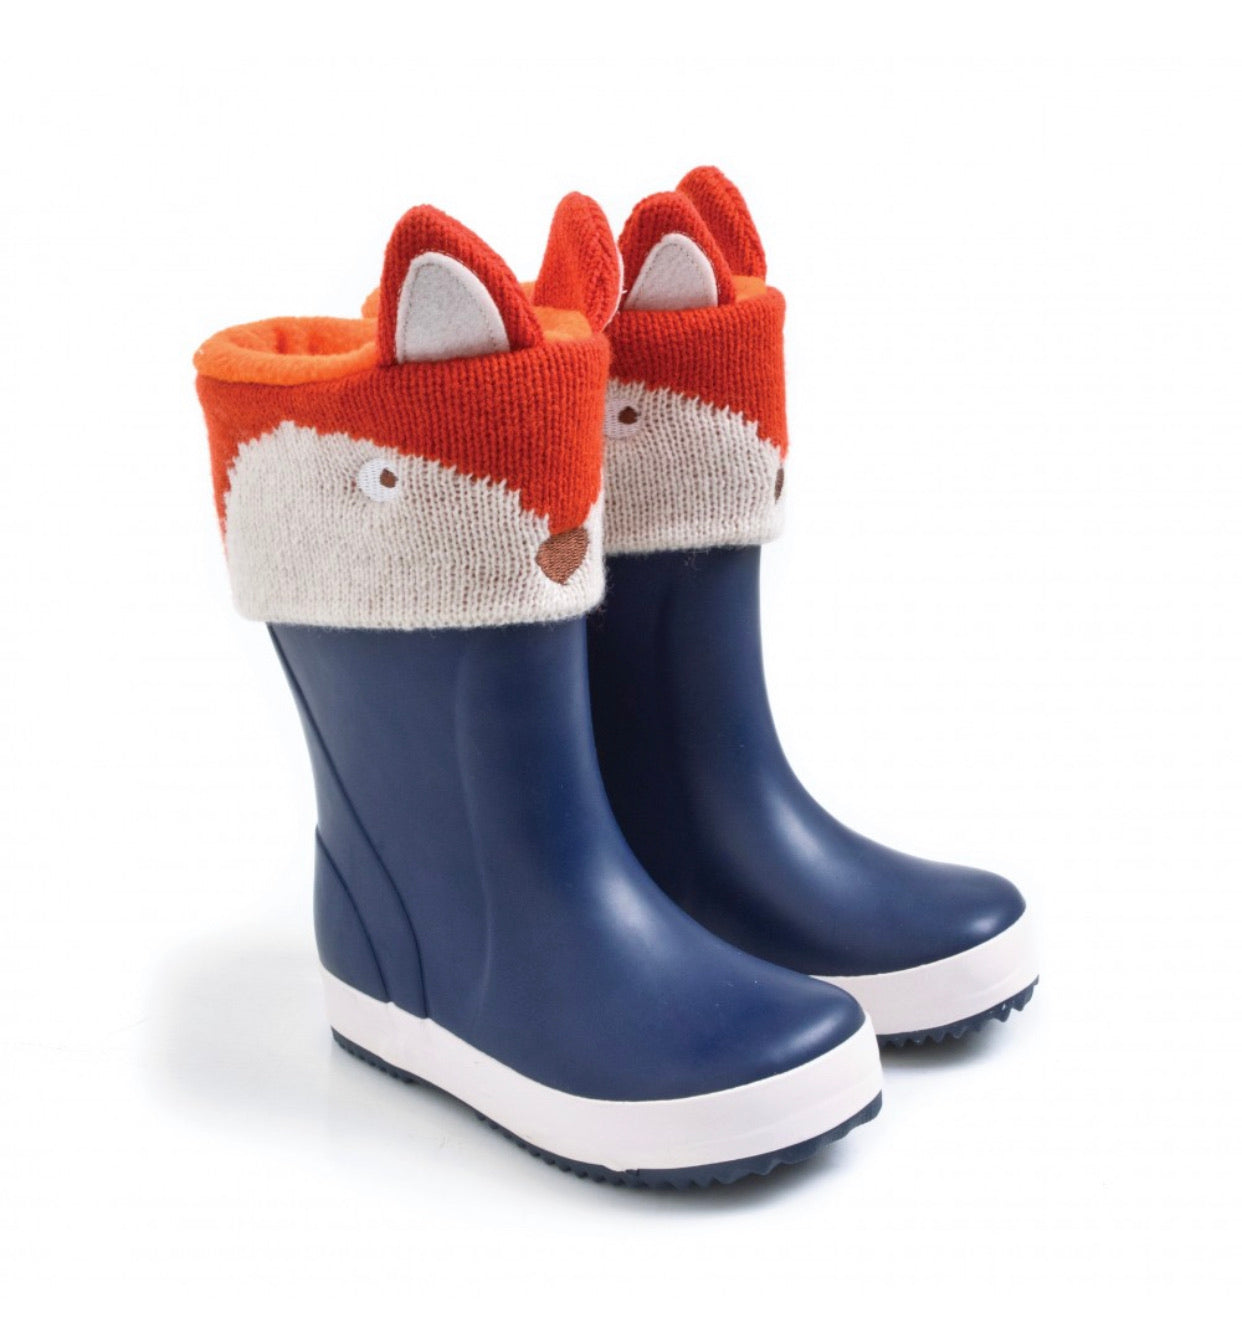 Fox Wellie Liners - Toddler